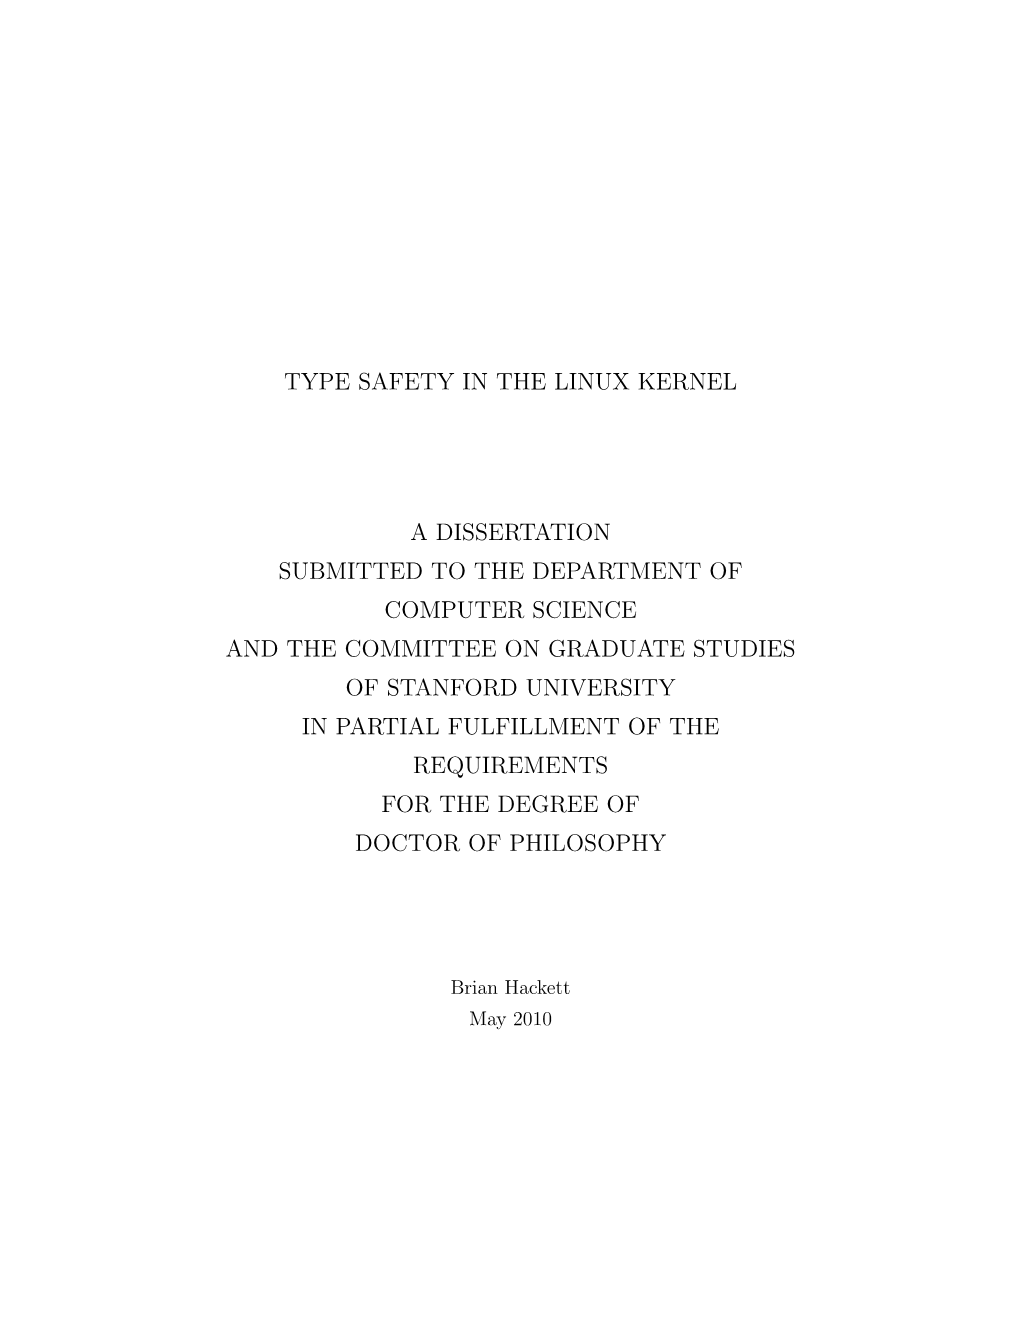 Type Safety in the Linux Kernel a Dissertation